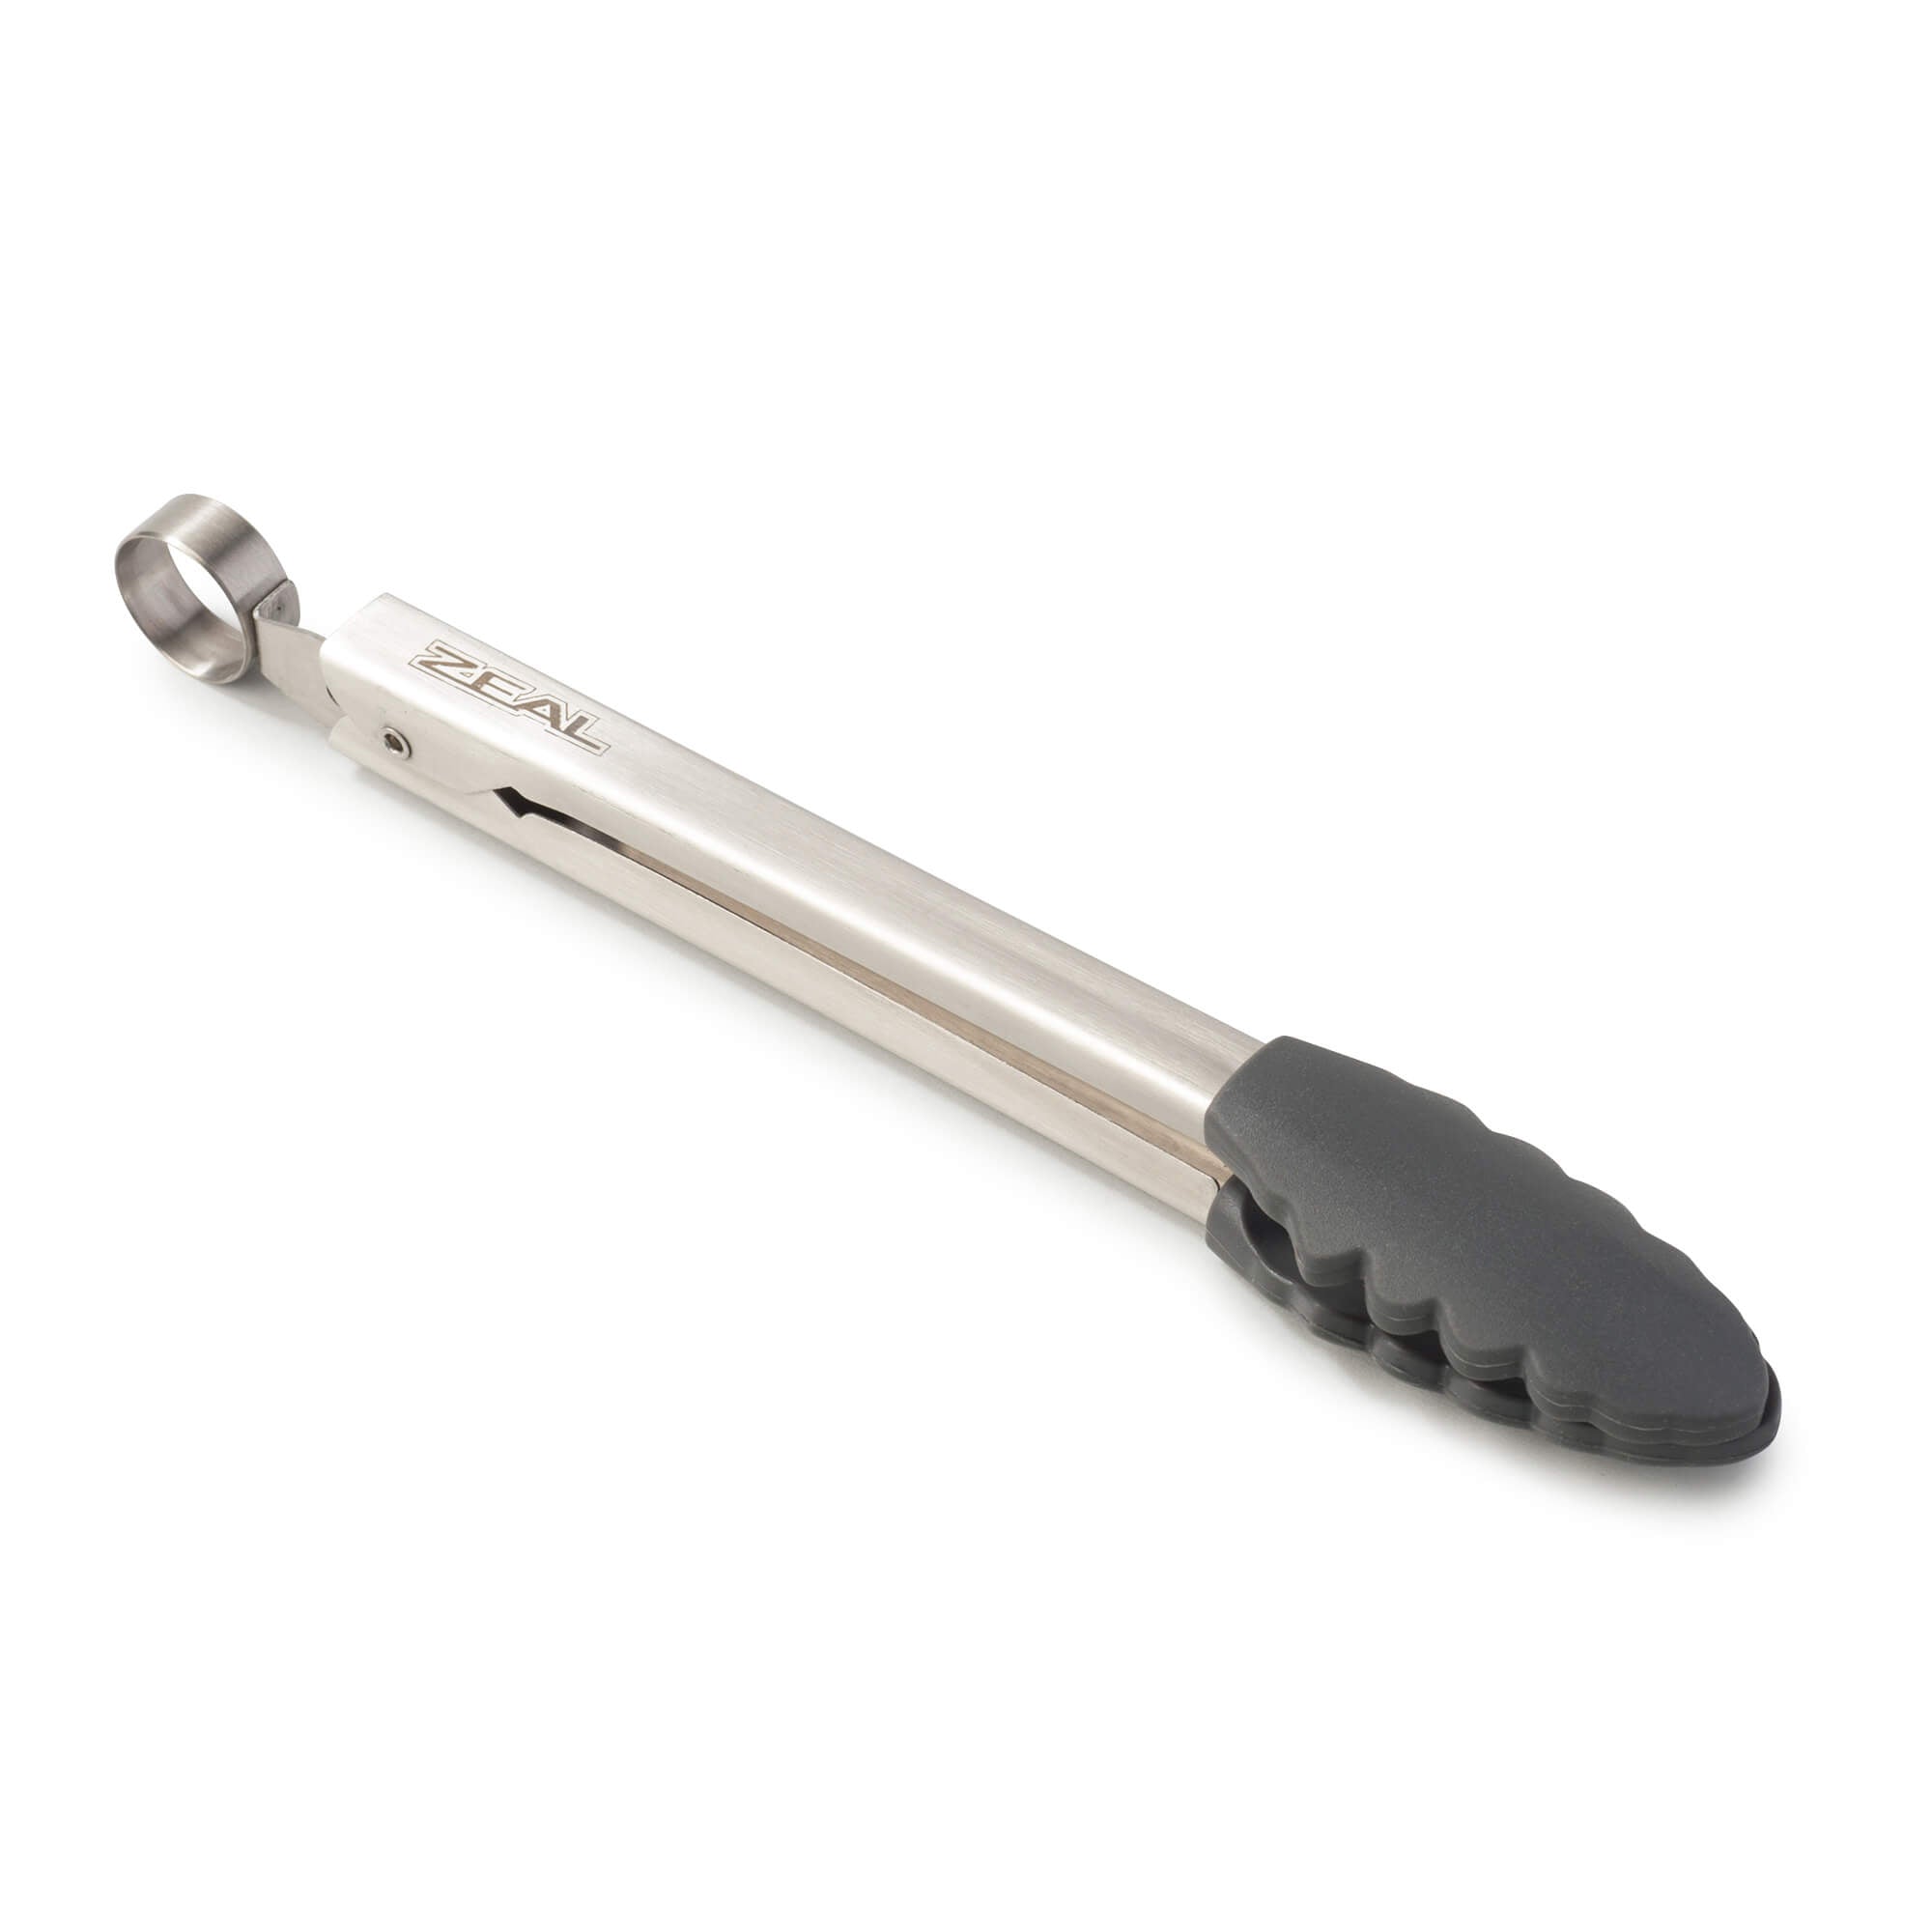 Locking Tongs 15.7 in. – Different Drummer's Kitchen, Inc.